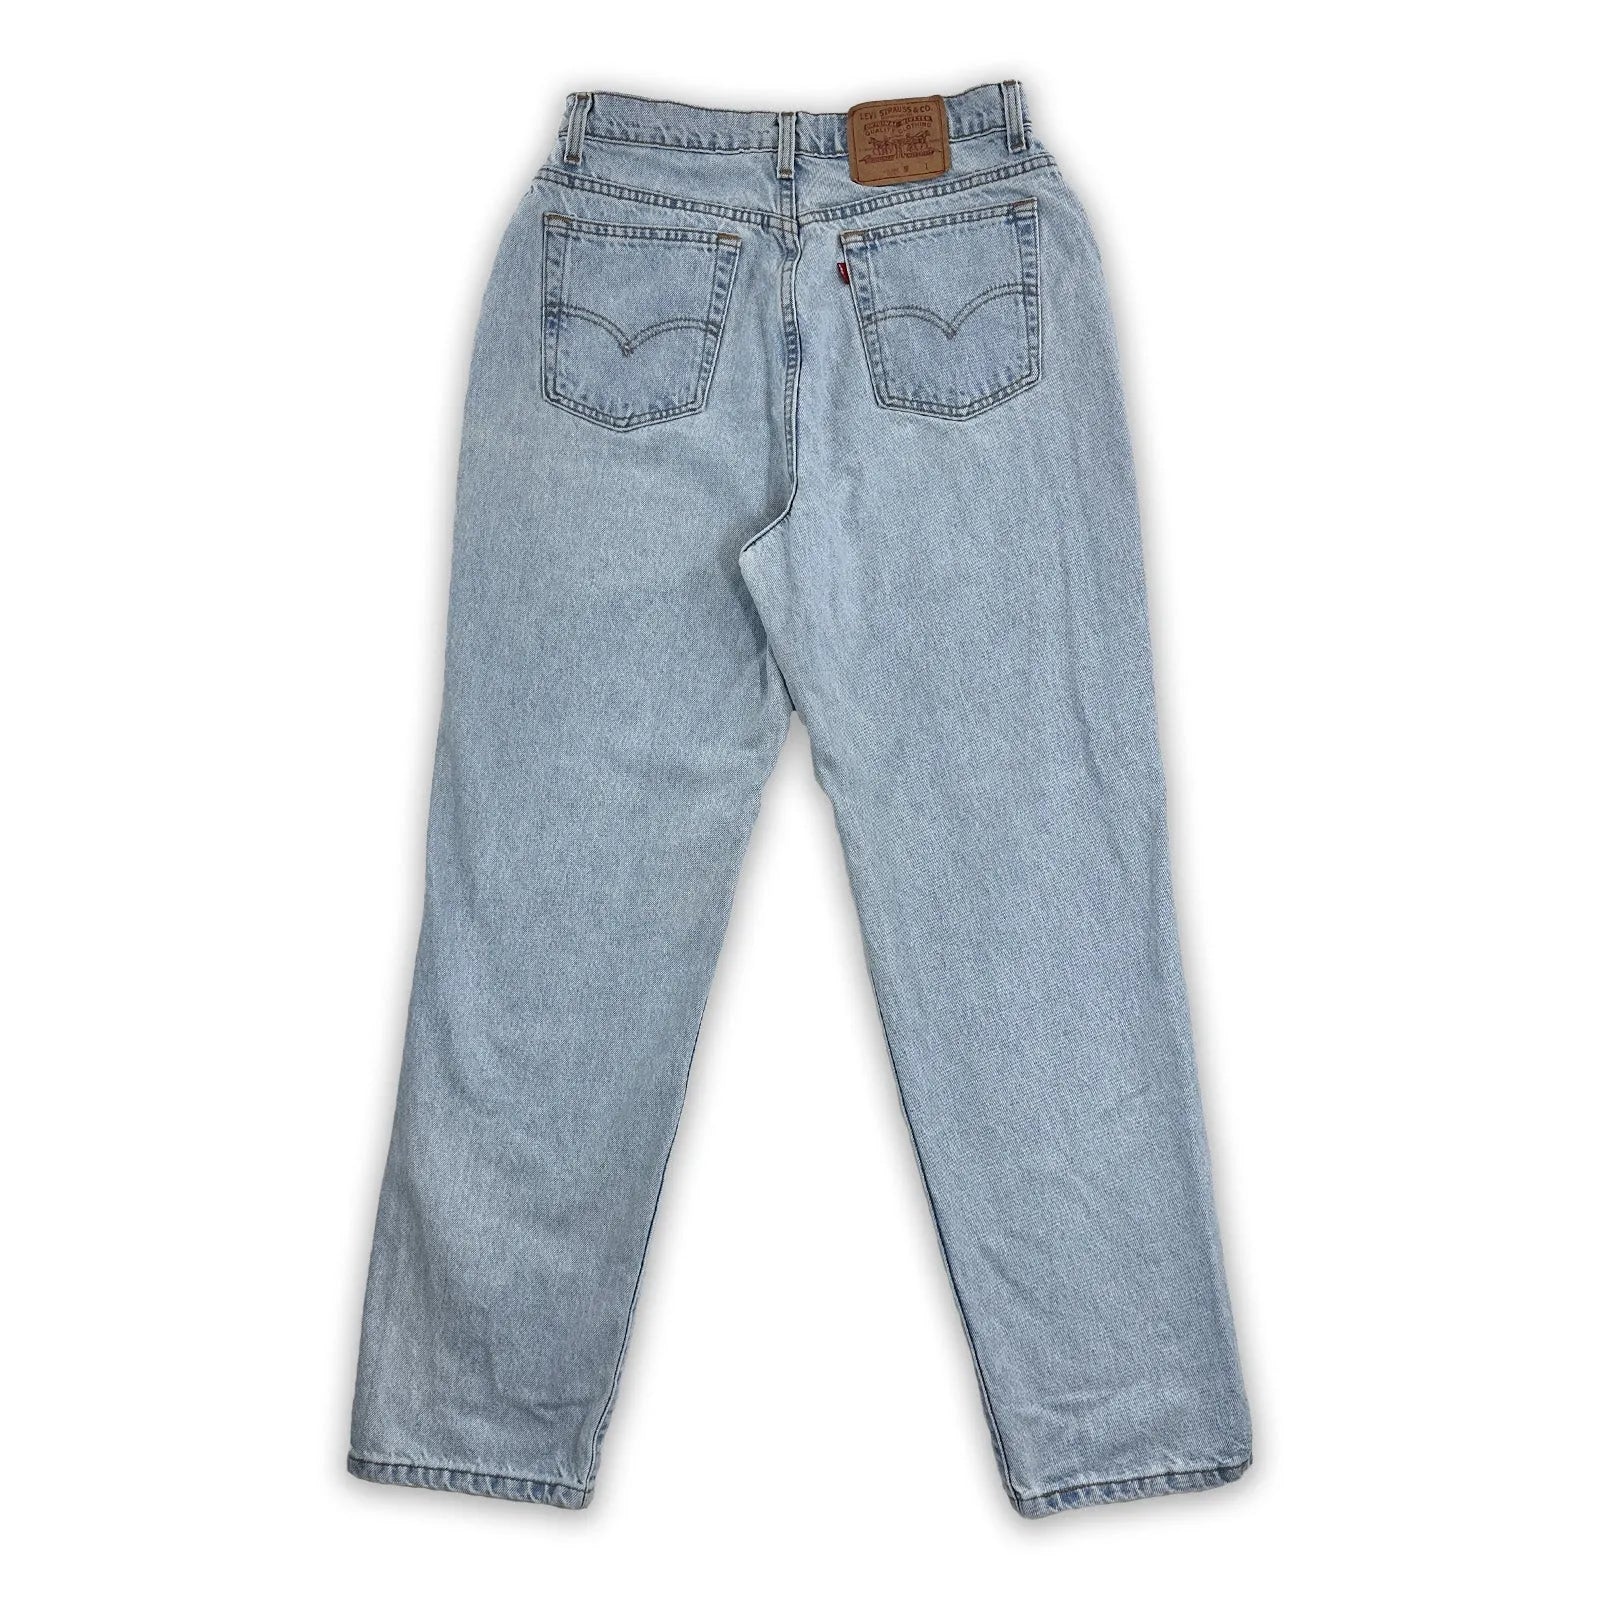 Vintage '90s Levi's Personal Pair Tapered Light Wash - Women's 30x31 Great Lakes Reclaimed Denim